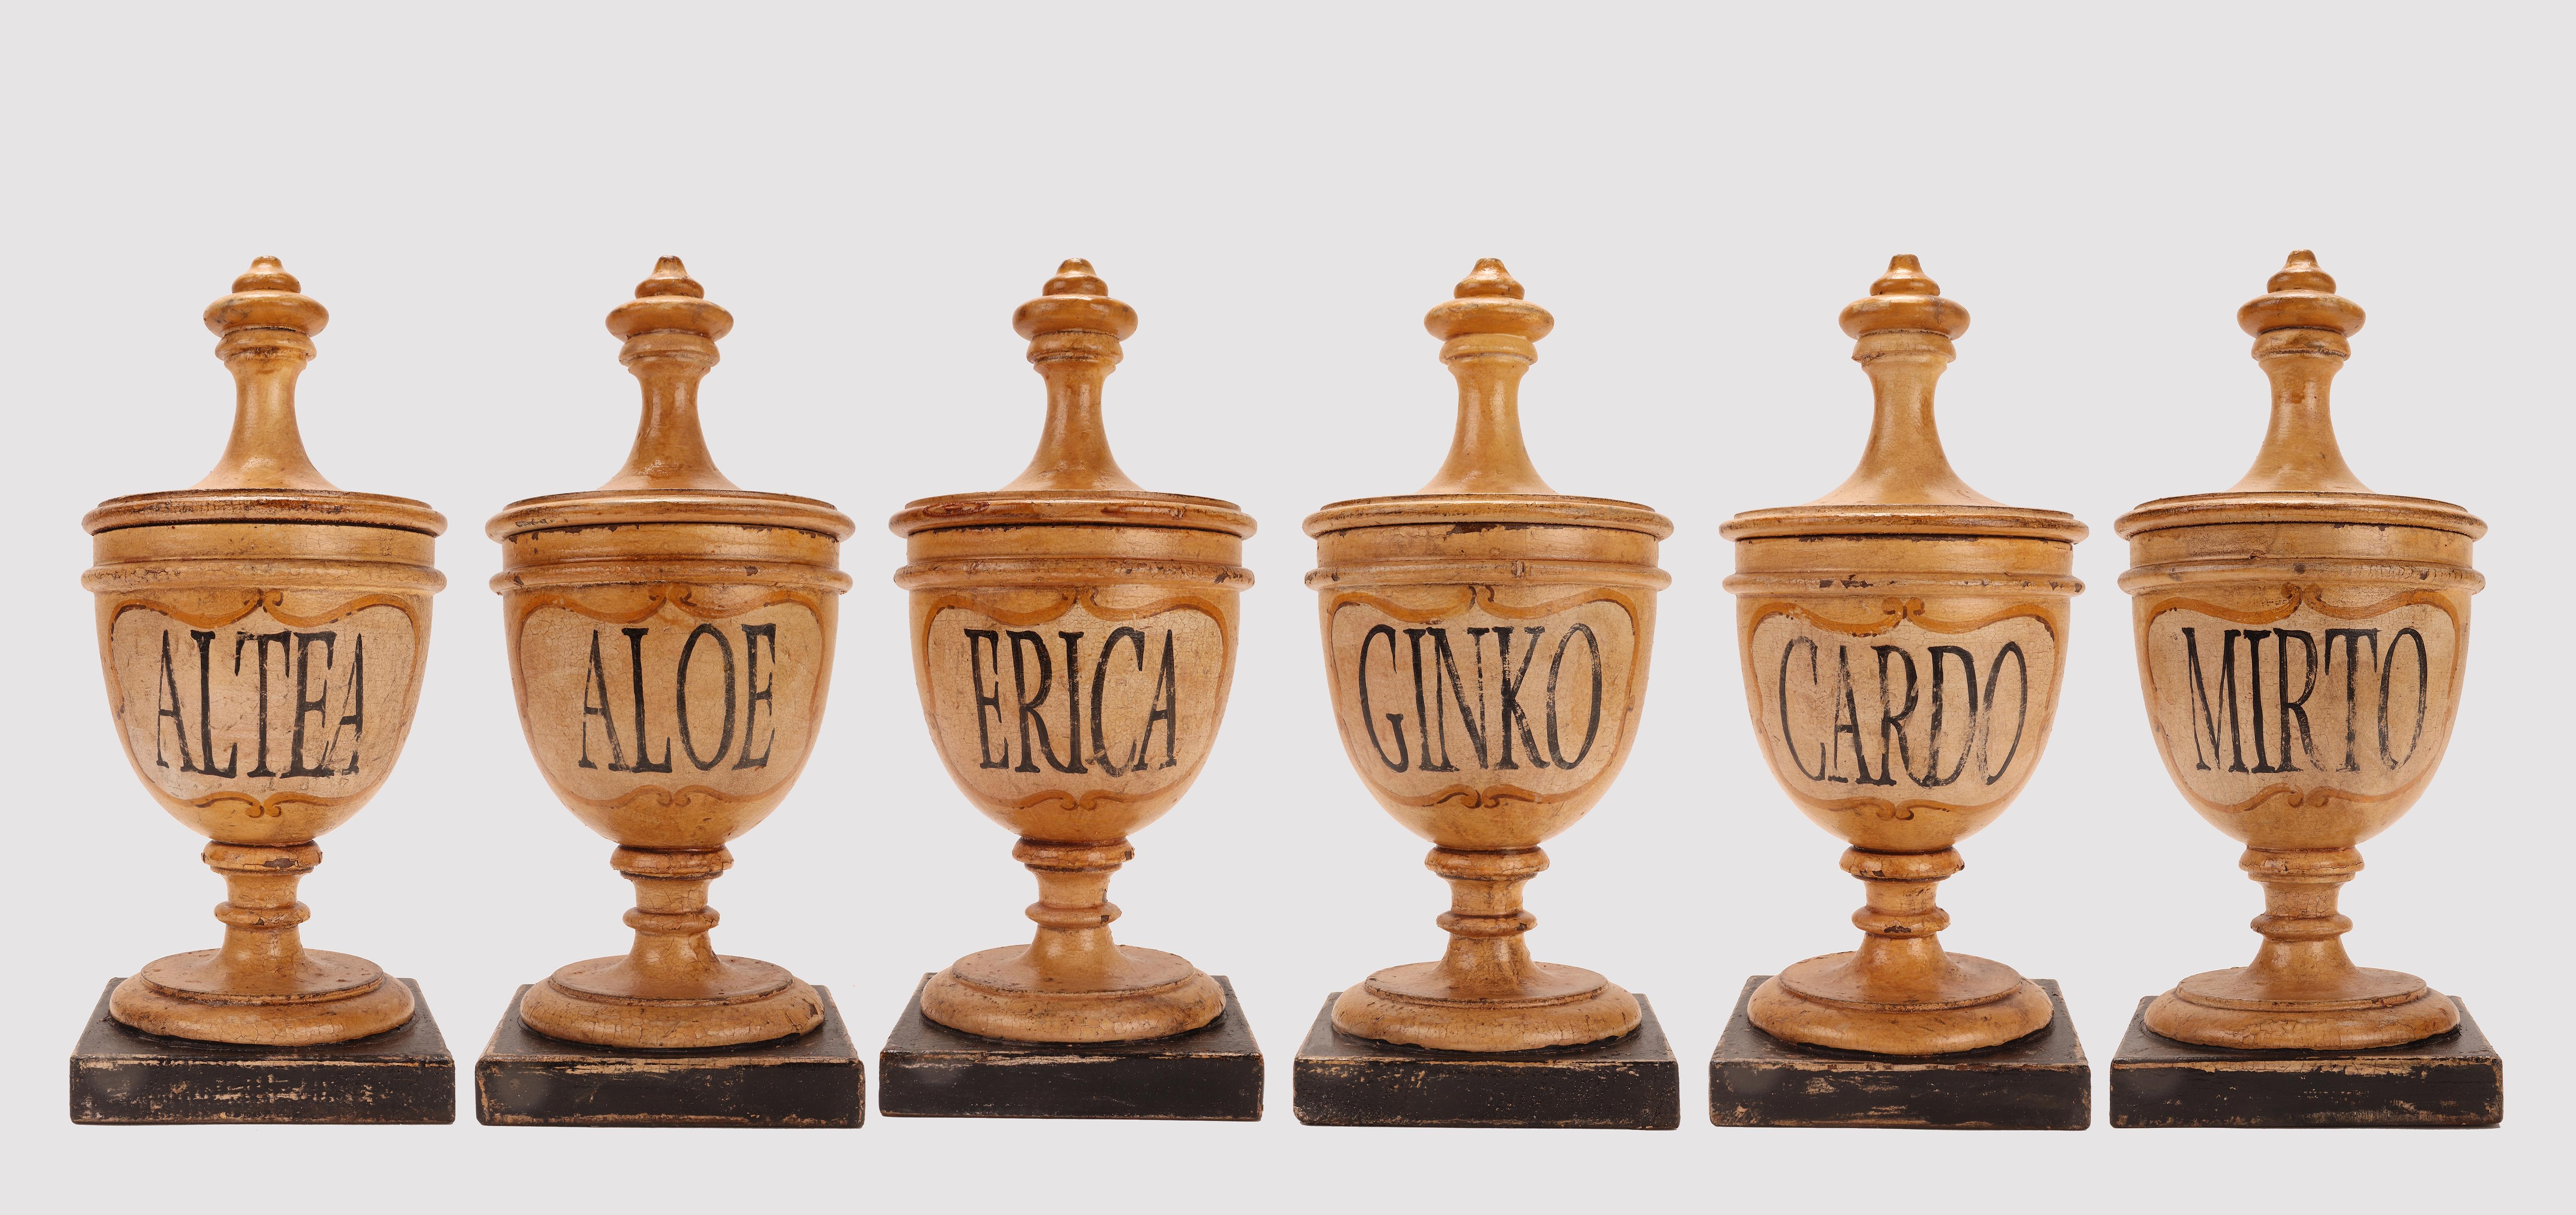 Set of six small herbalist apothecary wooden jars (Altea flowers, Aloe leaves, Erica flowers), in the purest Neoclassical style. The surface is finished with pastiglia white-cream with saffron color cartouche and gold decoration finishing parts, the